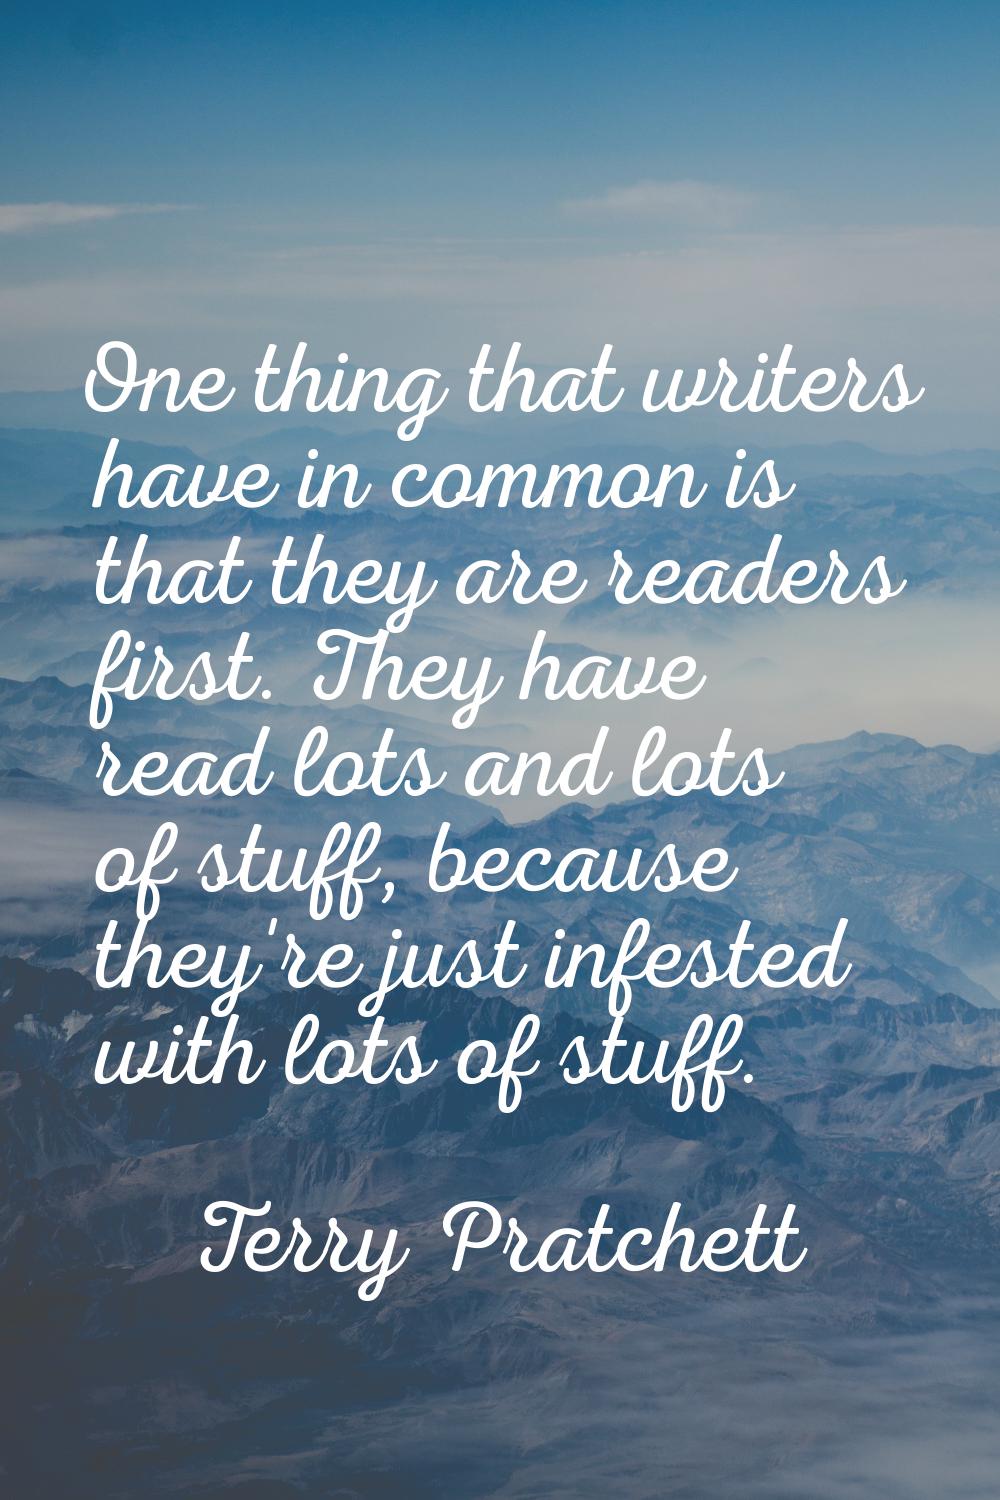 One thing that writers have in common is that they are readers first. They have read lots and lots 